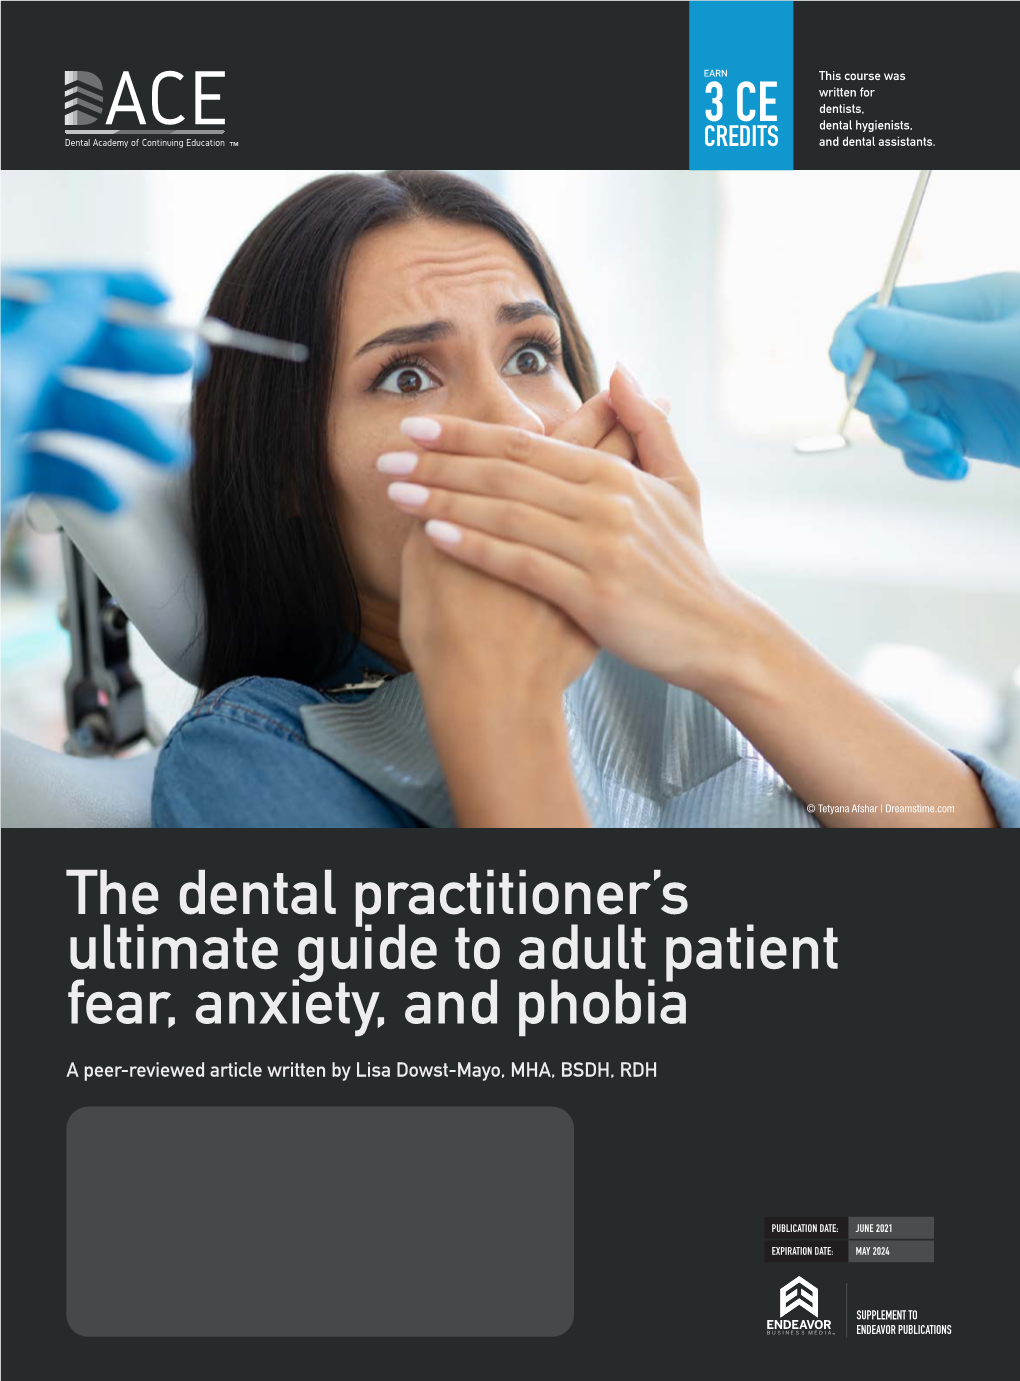 The Dental Practitioner's Ultimate Guide to Adult Patient Fear, Anxiety